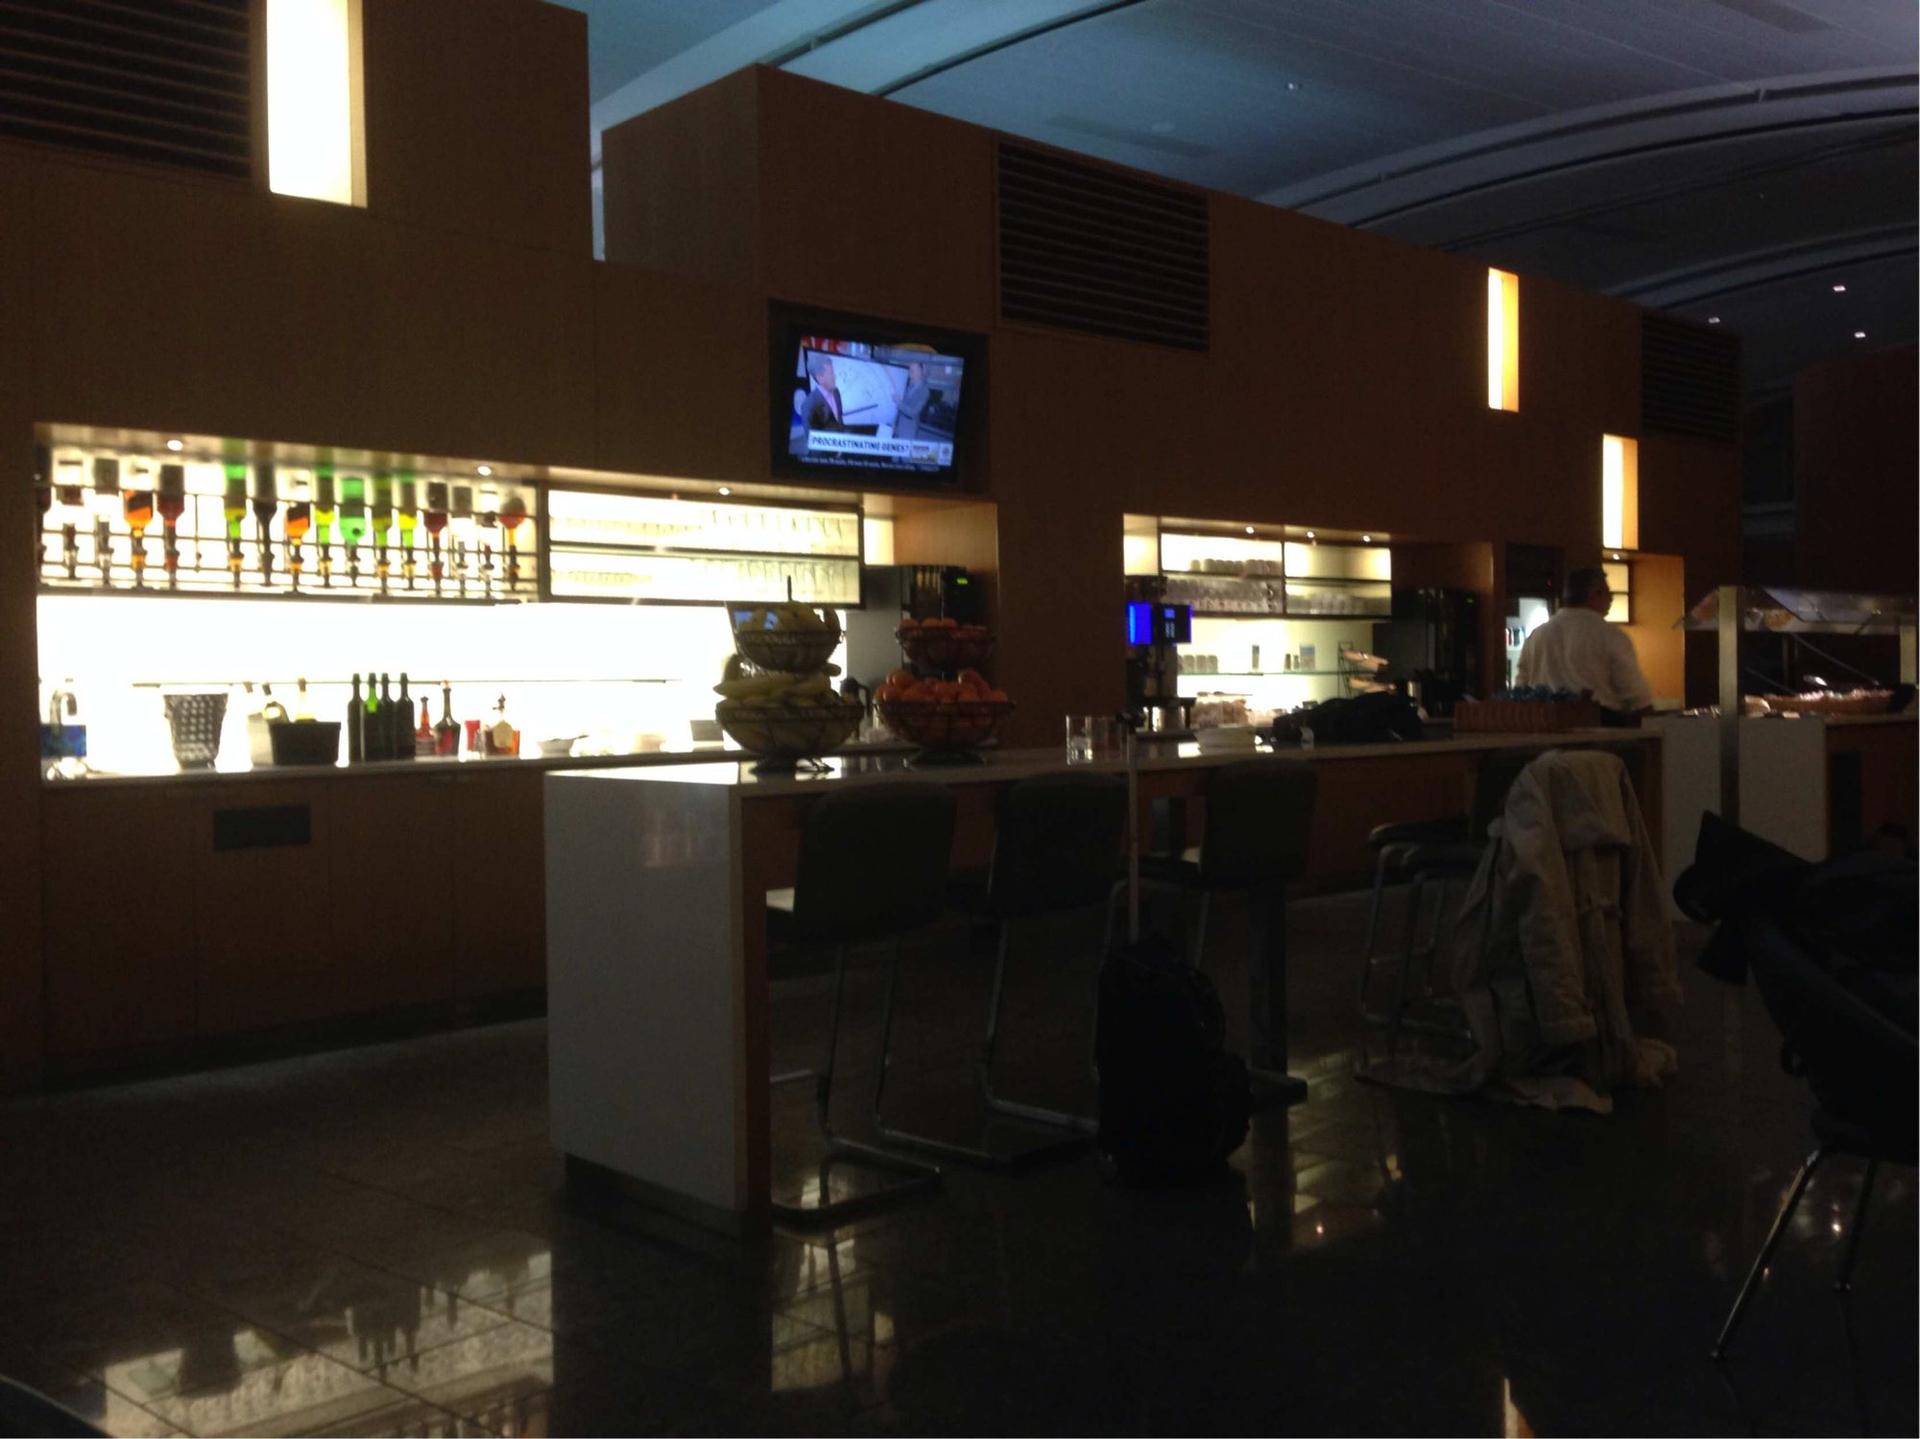 Air Canada Maple Leaf Lounge image 1 of 27